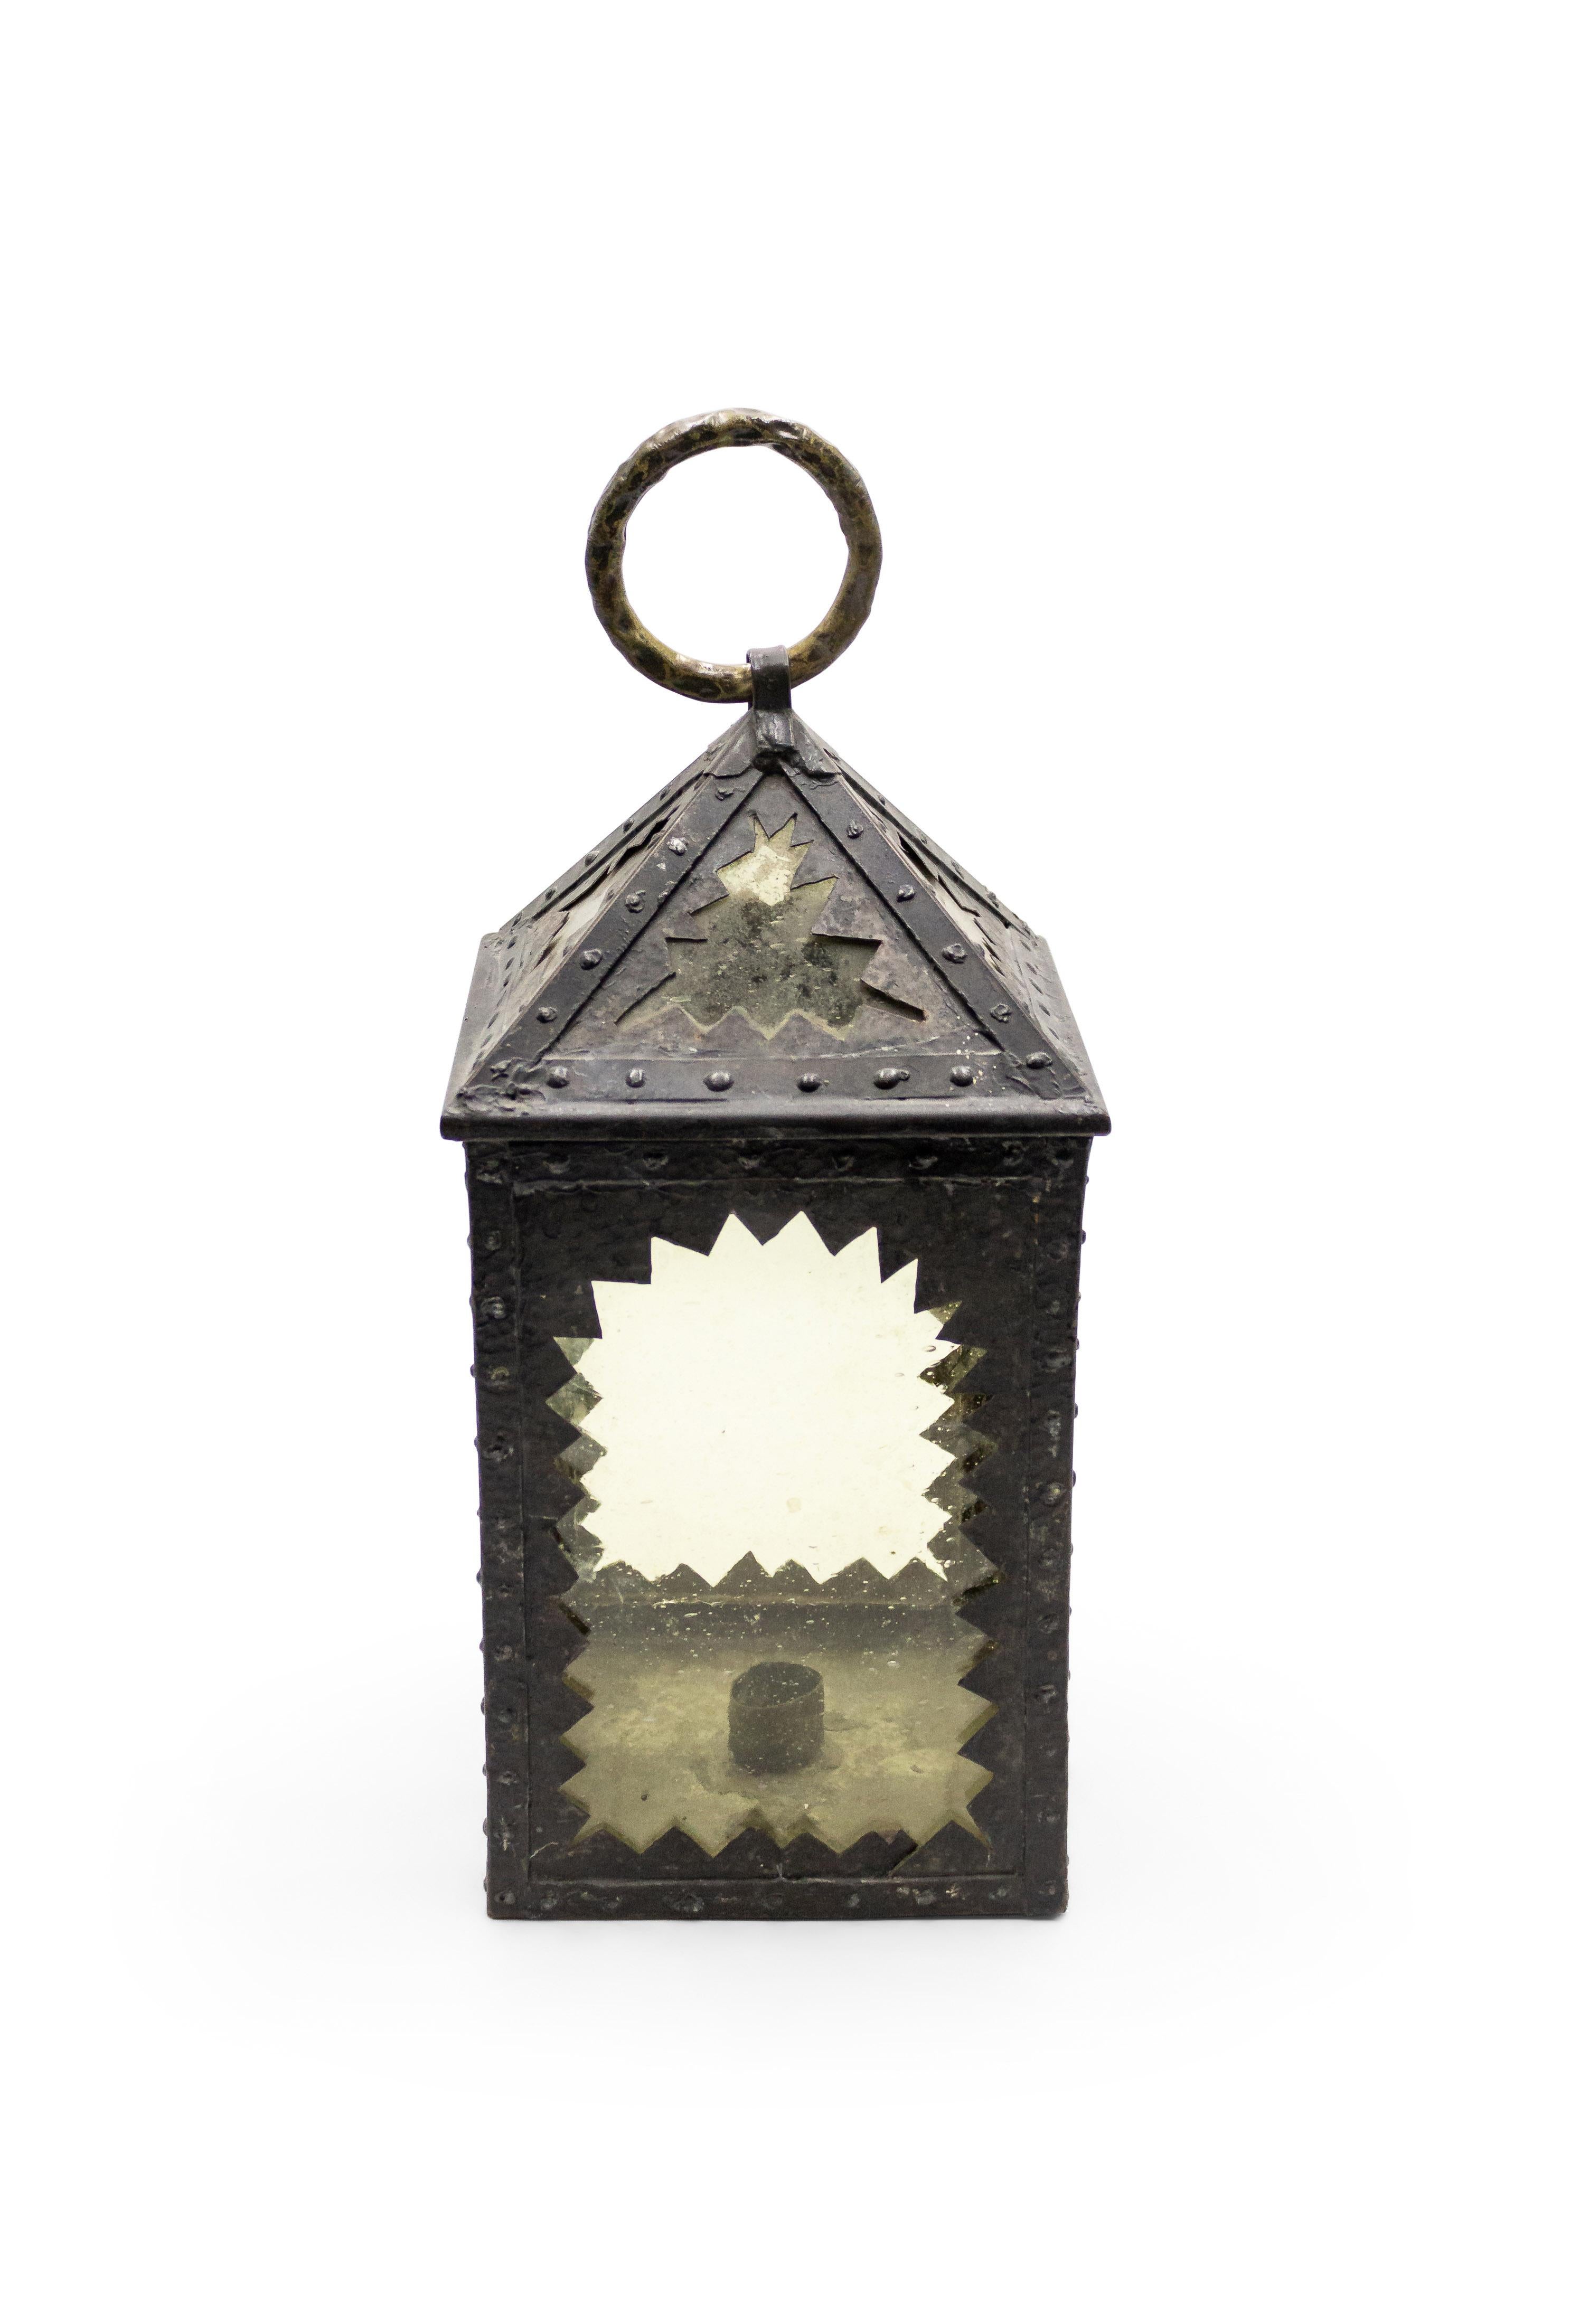 American mission square wrought iron hand lantern with amber glass inset into sawtooth design framed panels with brass ring top.